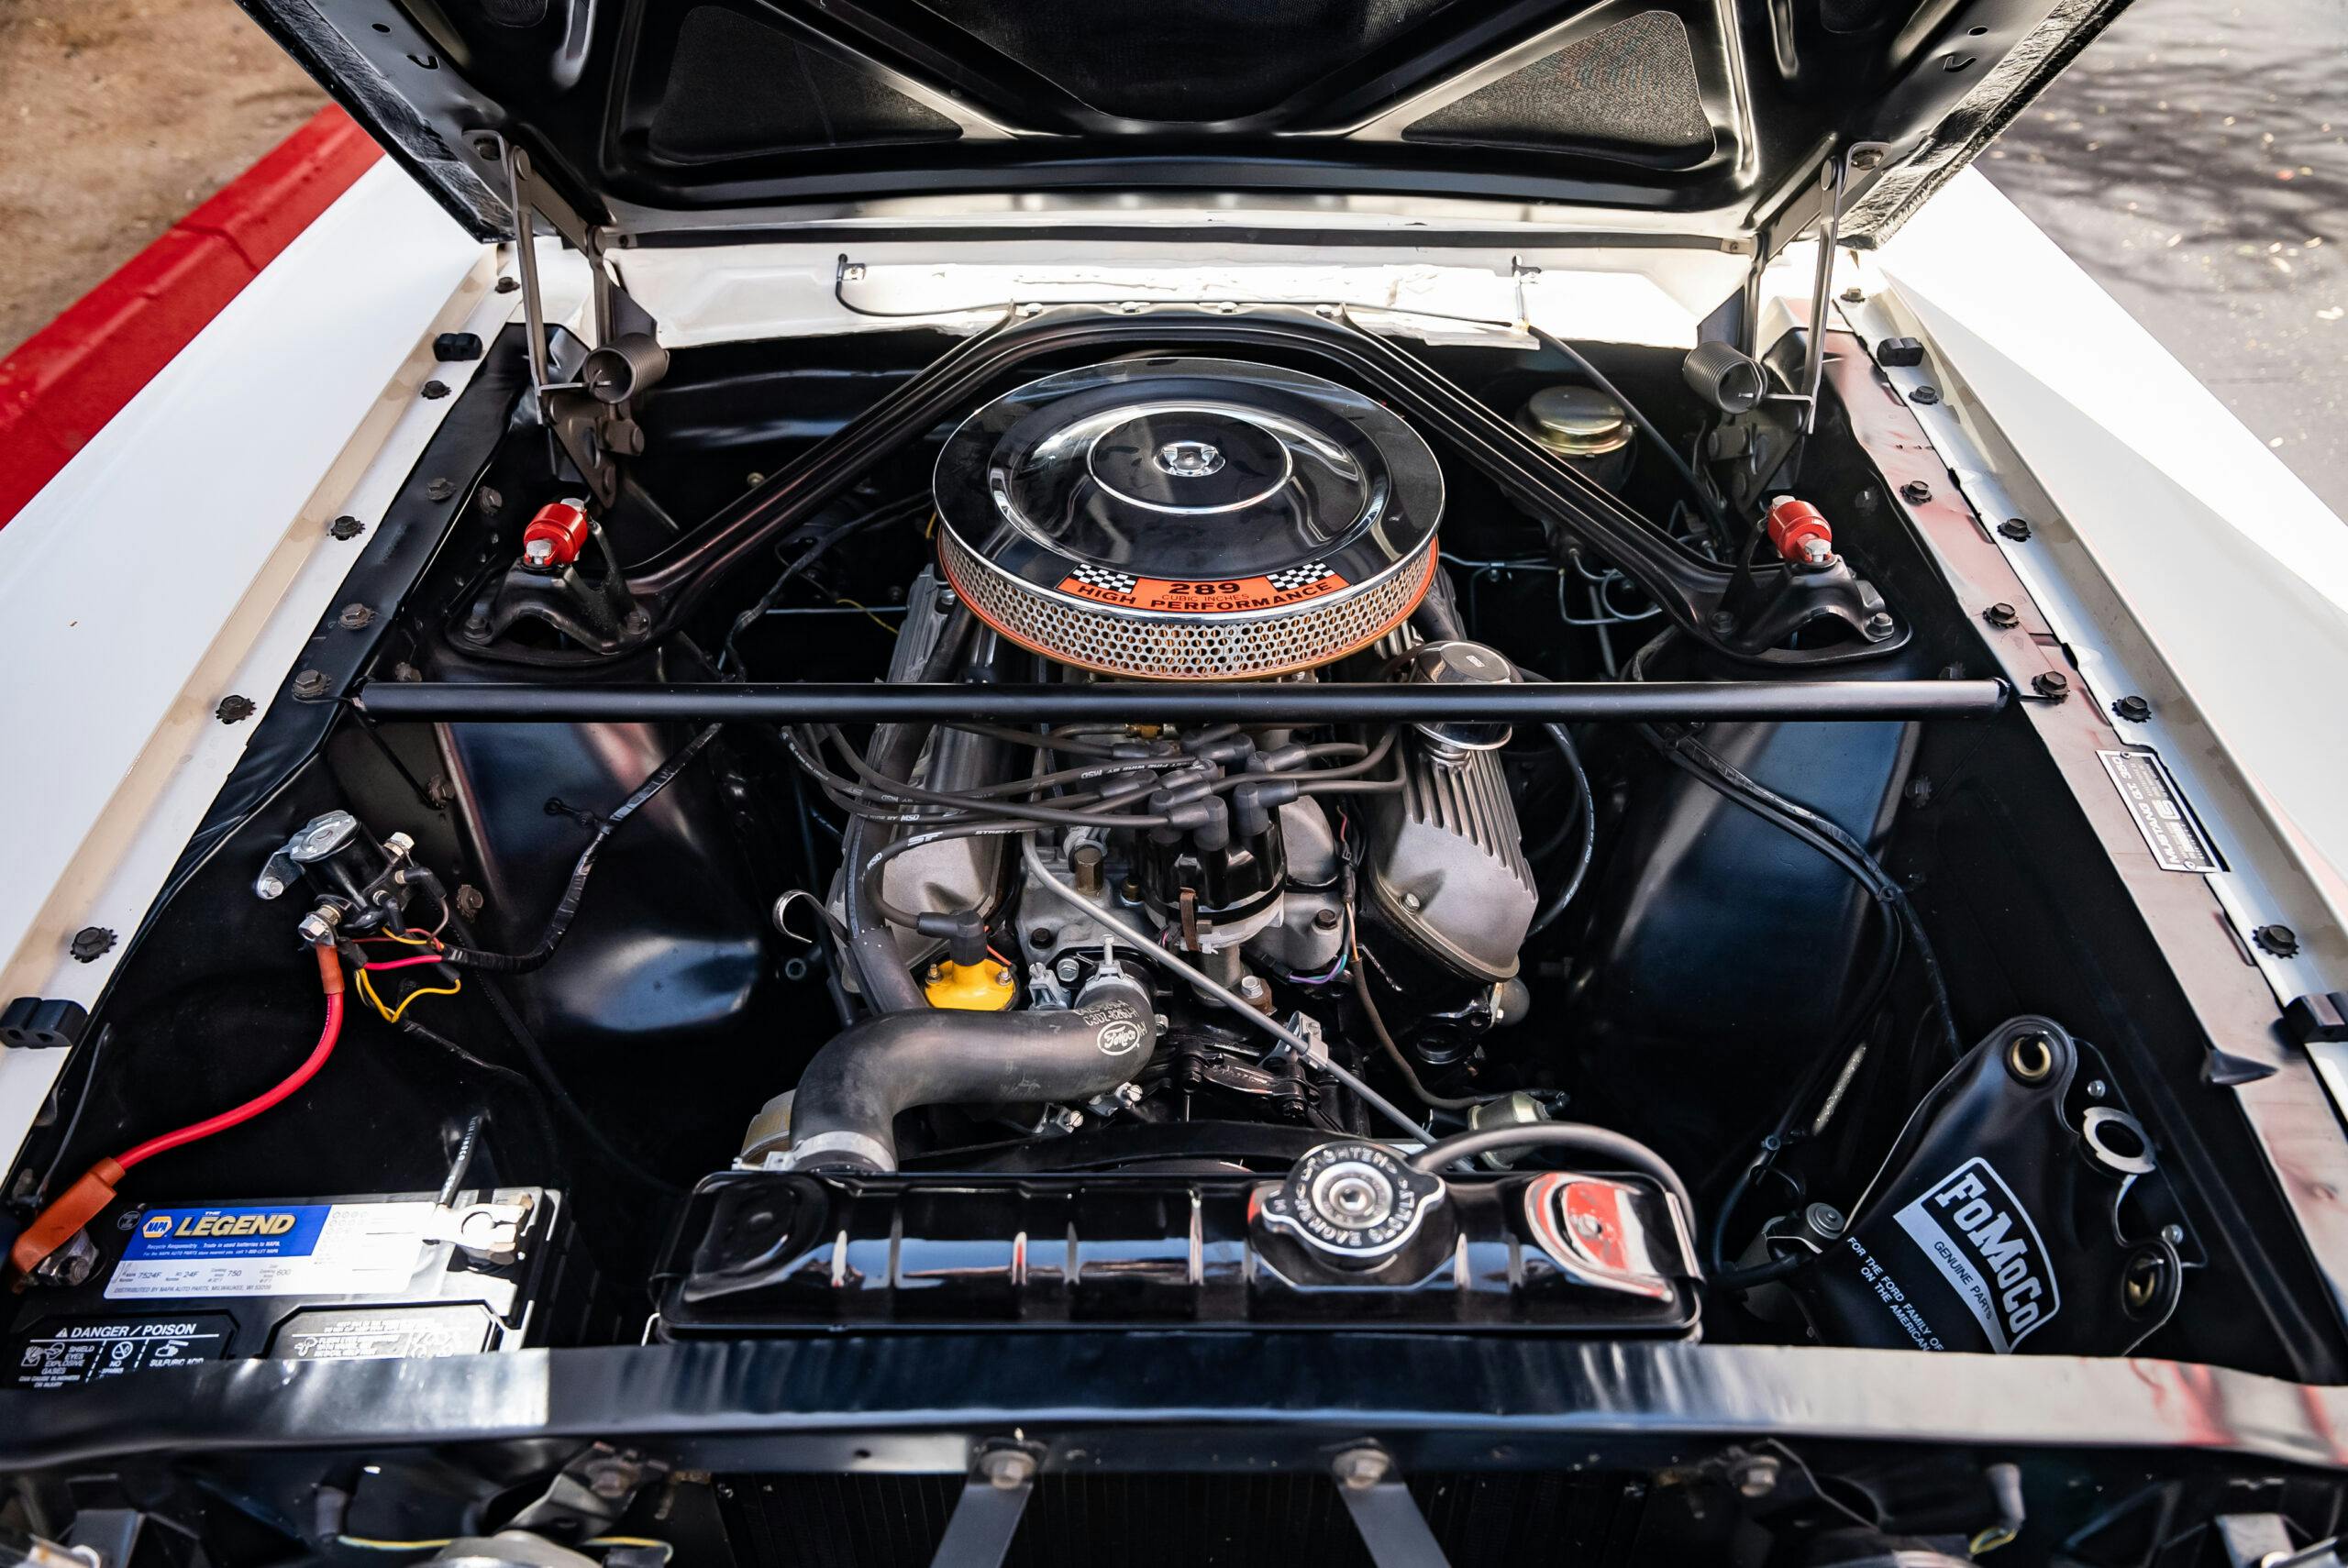 Shelby Mustang GT350 engine bay